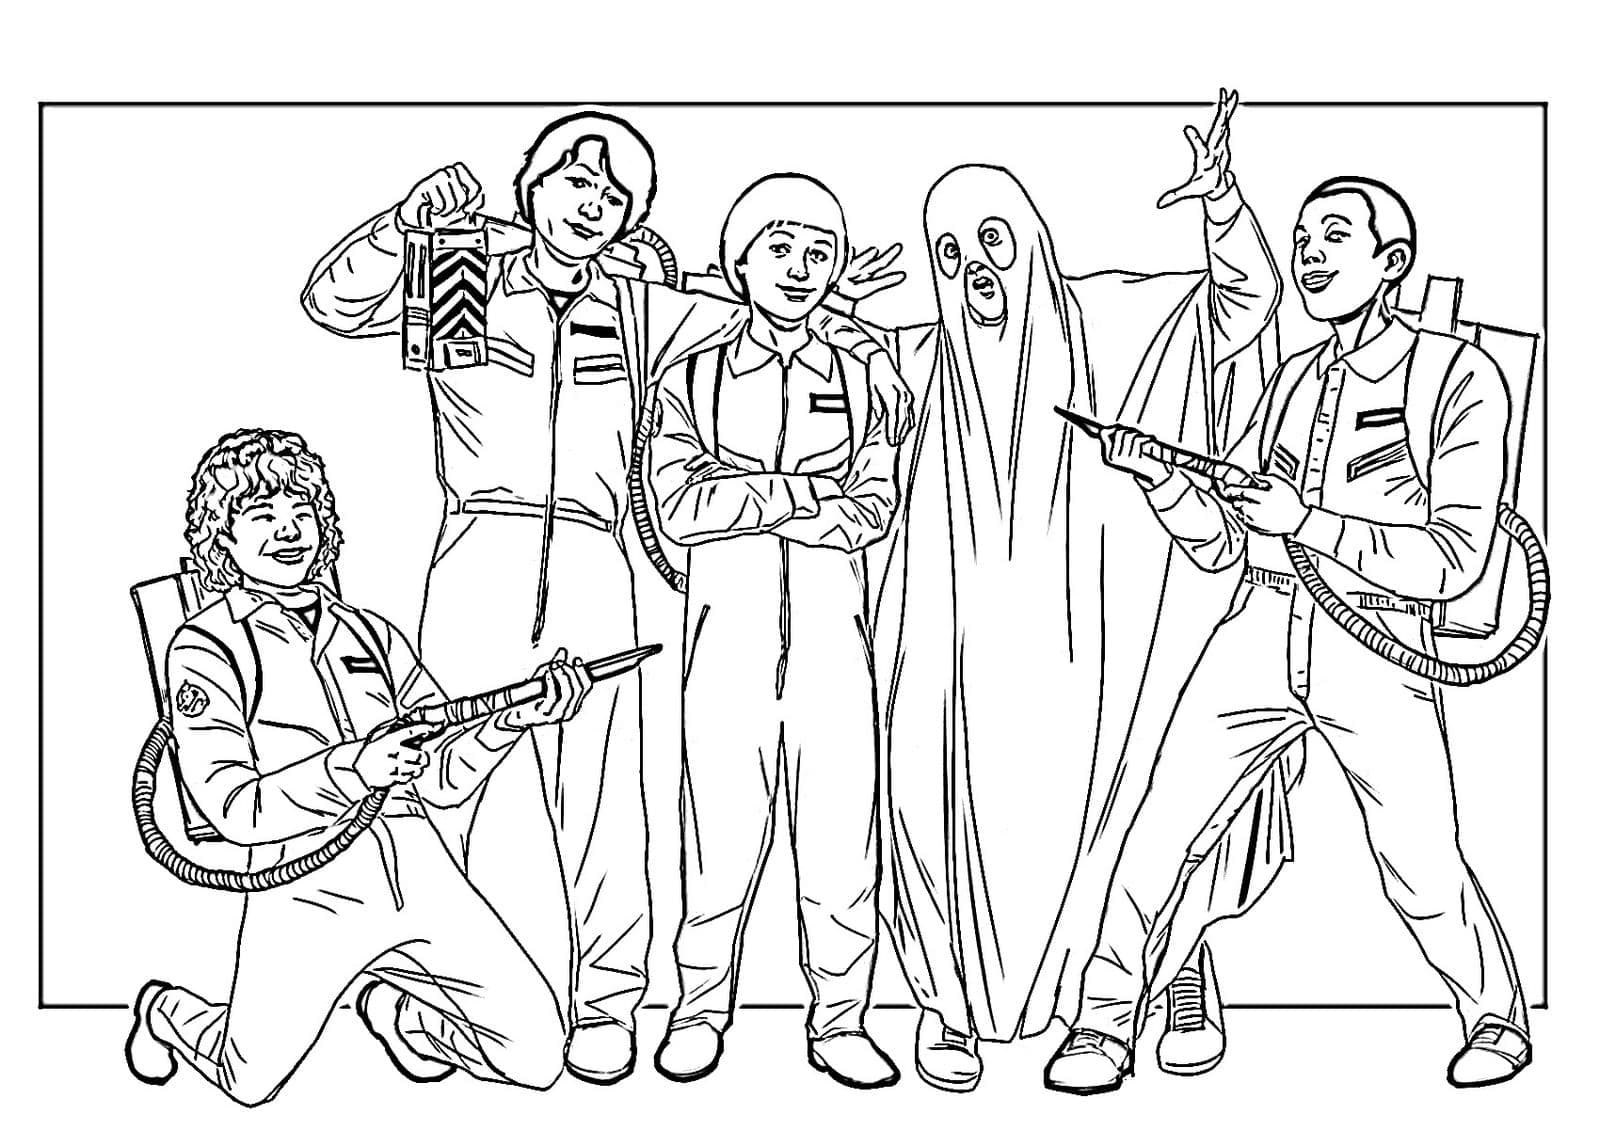 Halloween stranger things coloring page